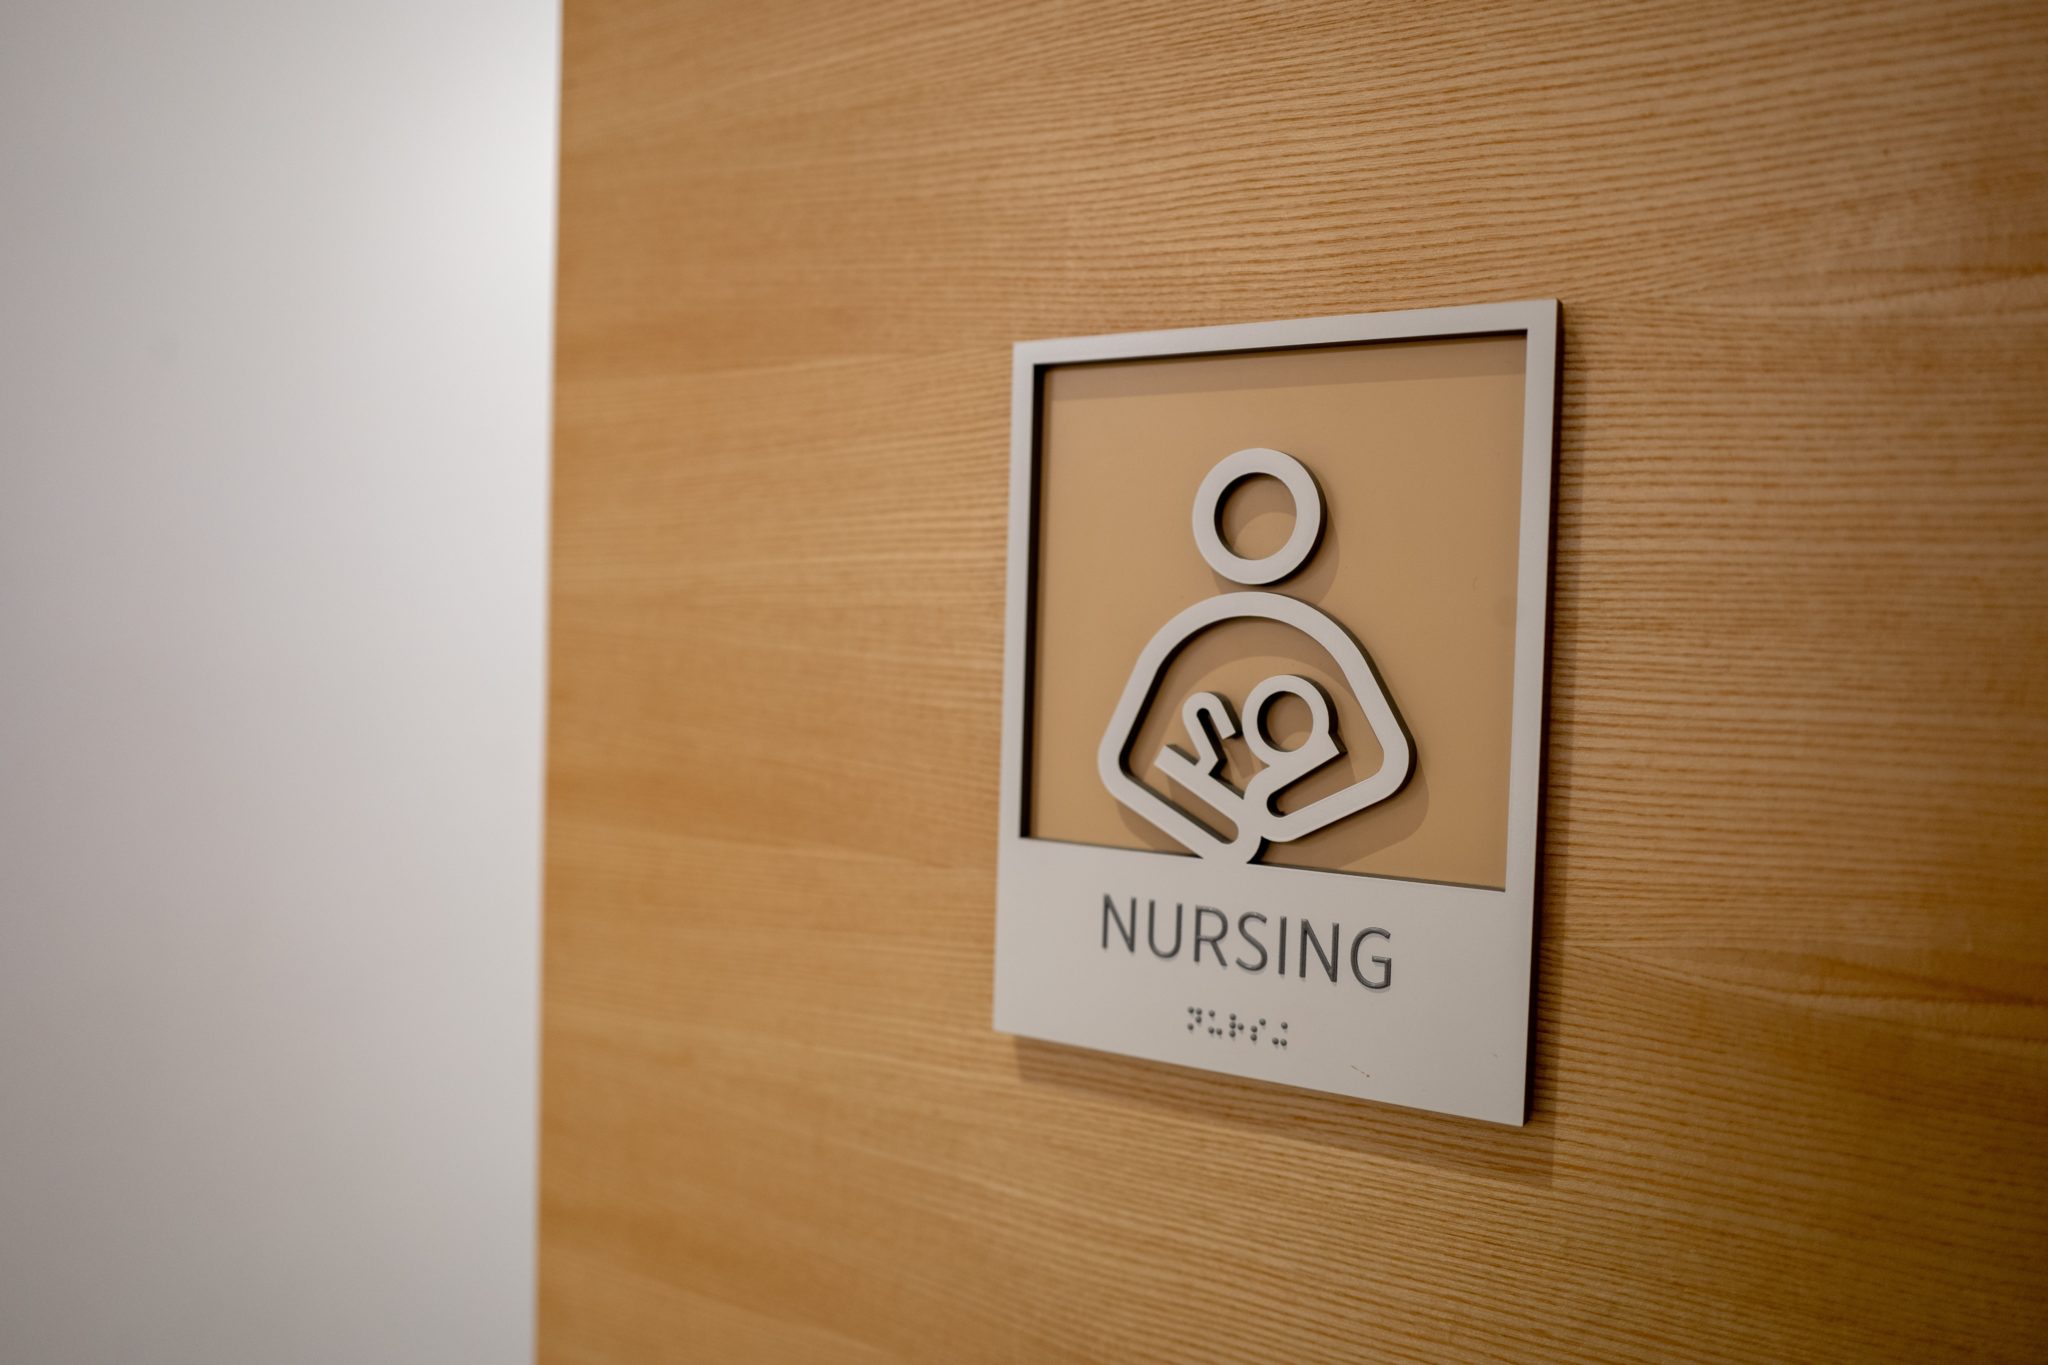 A sign for a breastfeeding room in a commercial building in the US state of California in 2019.